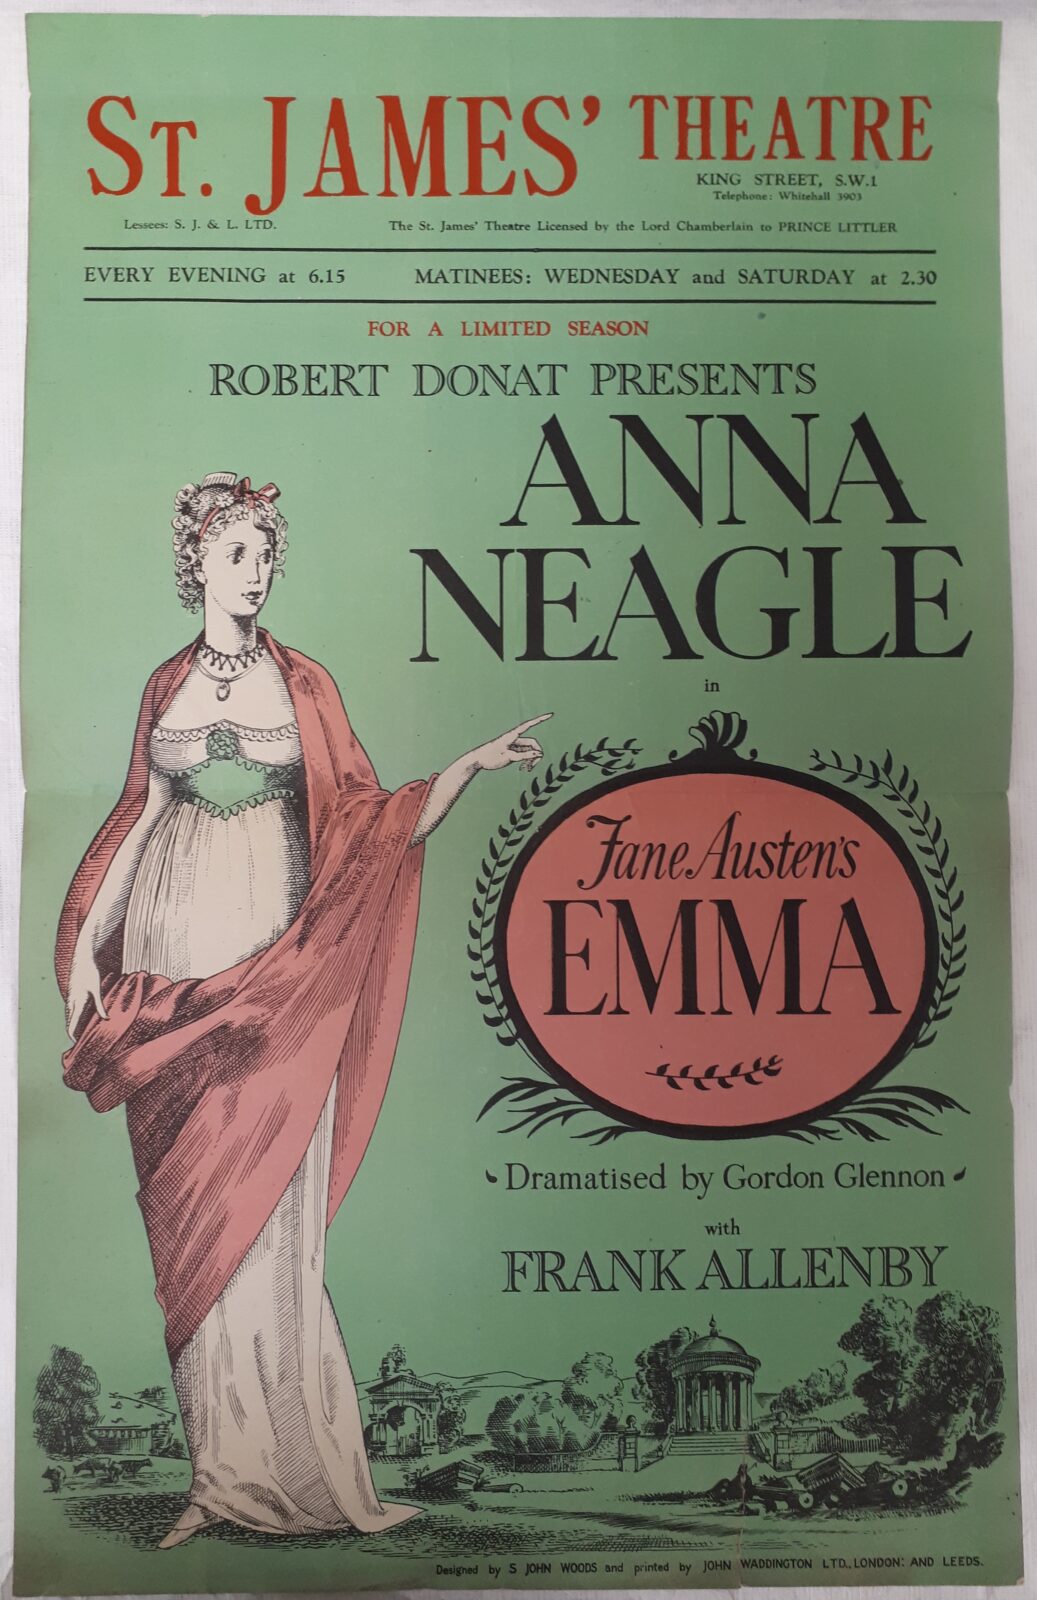 St. James Theatre poster for the 1945 theatrical production of Emma, starring Anna Neagle